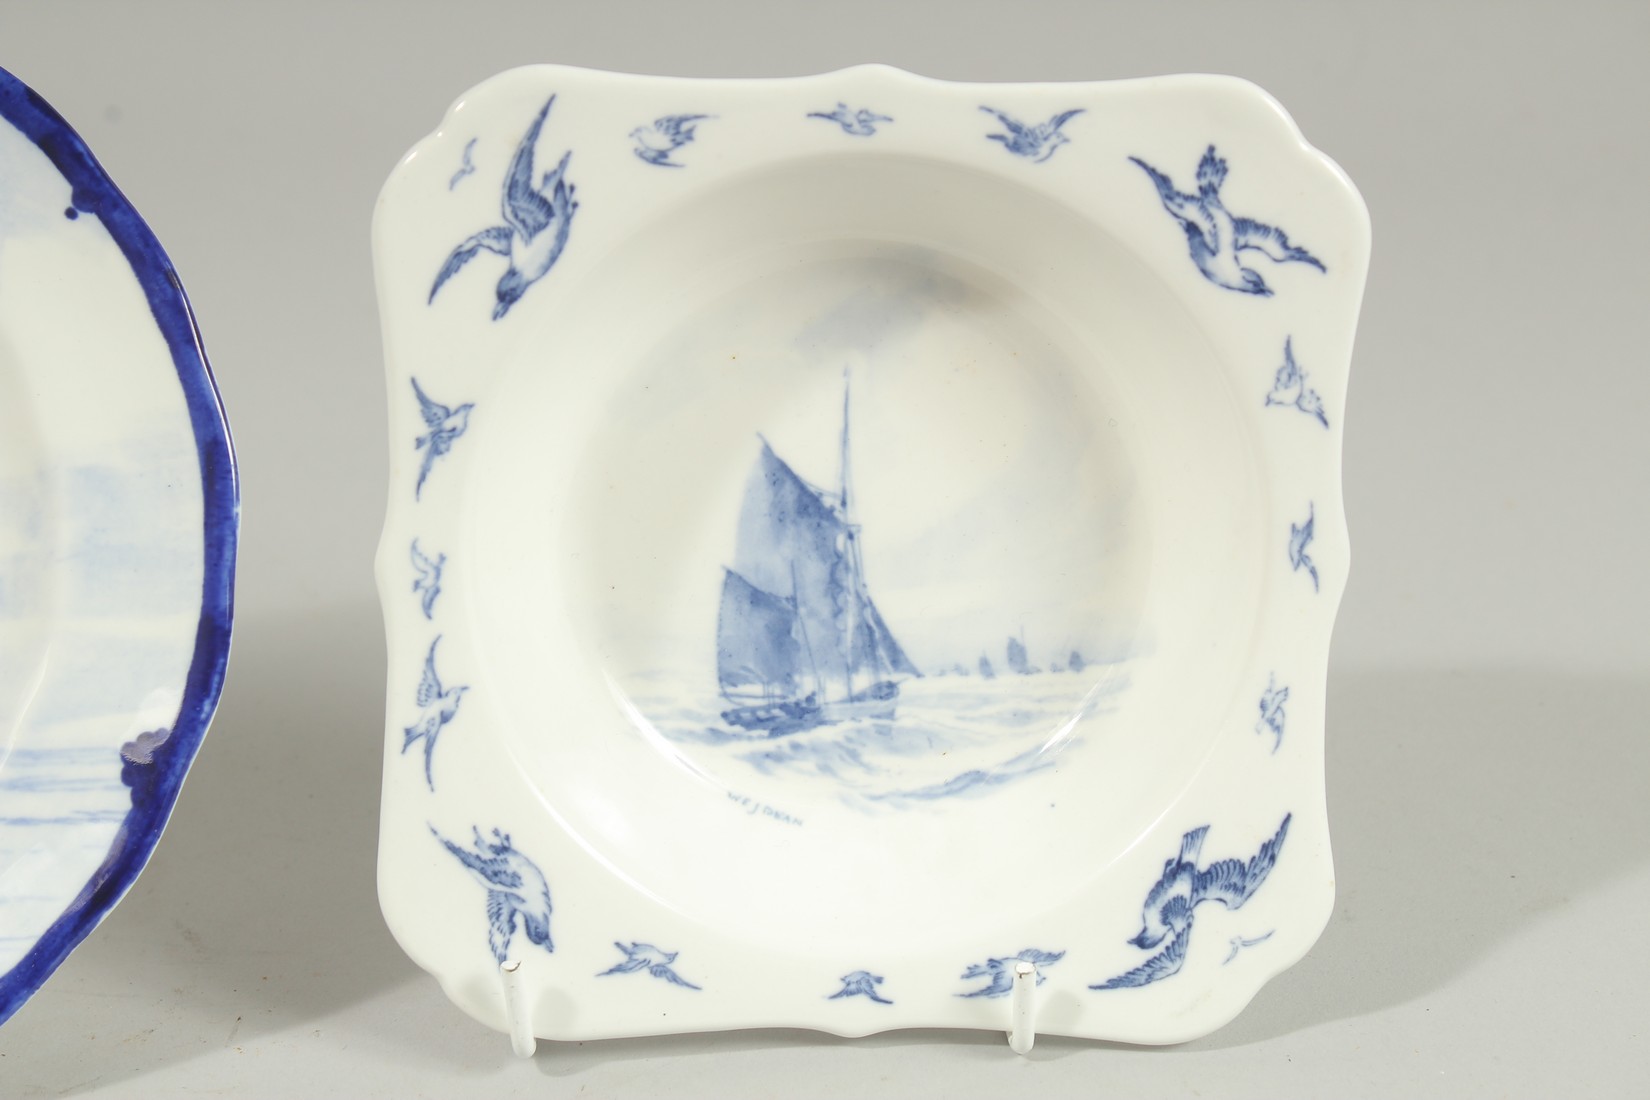 A ROYAL CROWN DERBY SQUARE SHAPED BOWL painted with sailing vessels by W.E.J.DEAN. Signed and a - Image 3 of 6